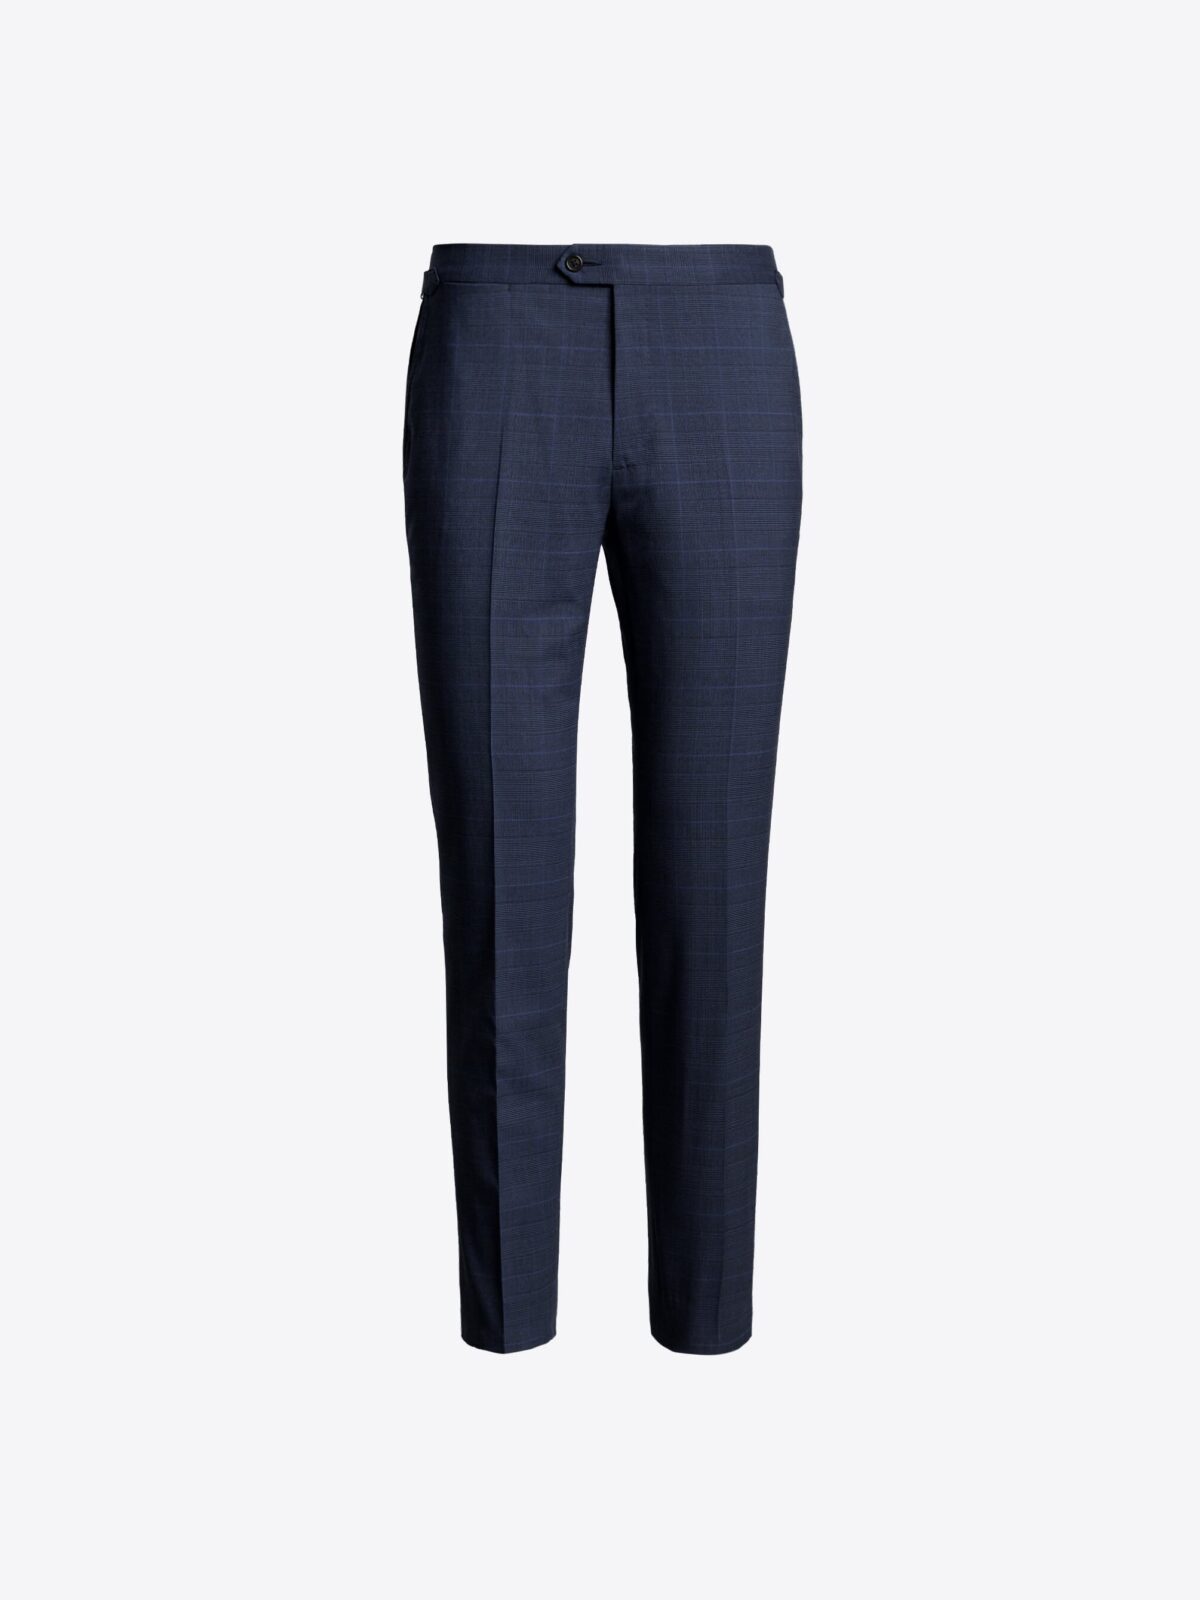 Projek Raw - Men's Blue-accent Prince of Wales stretch pant Slim fit